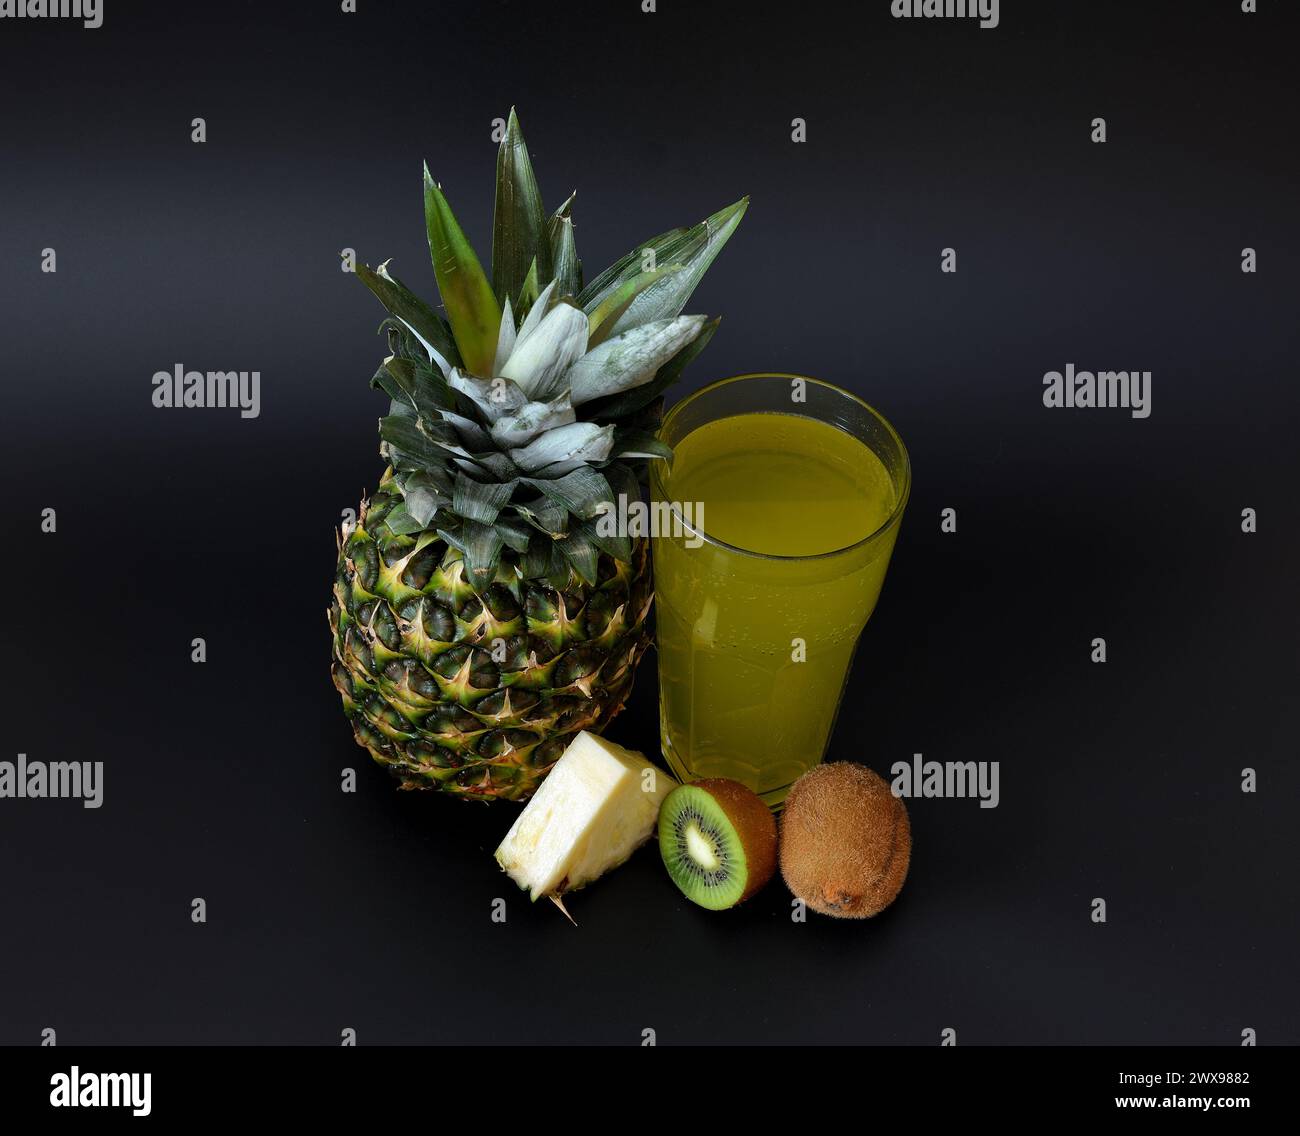 Ripe pineapple, ripe kiwi slices and a glass of fresh fruit juice on a black background. Close-up. Stock Photo